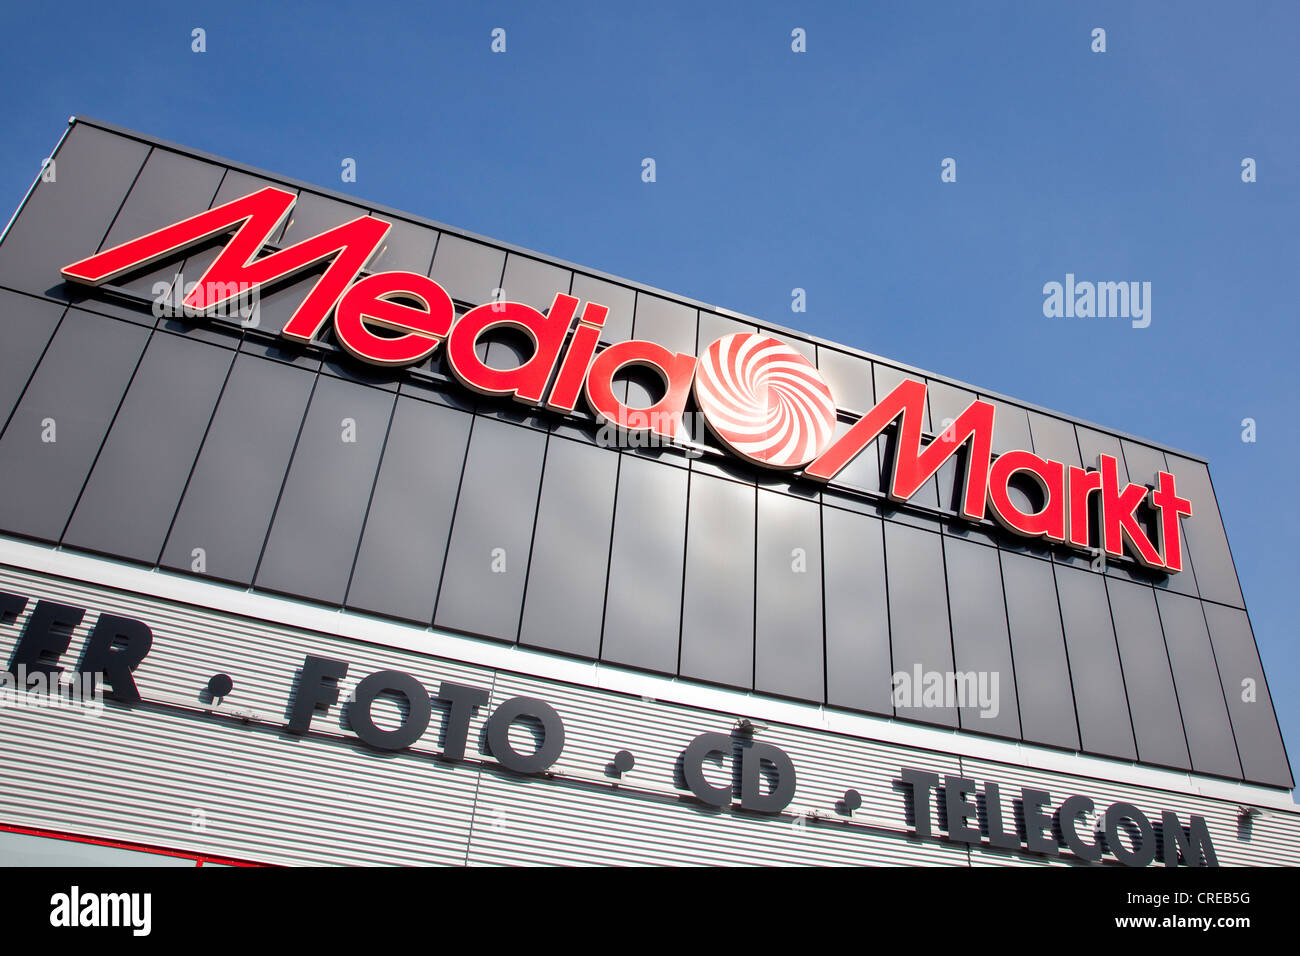 Media Markt High Resolution Stock Photography and Images - Alamy